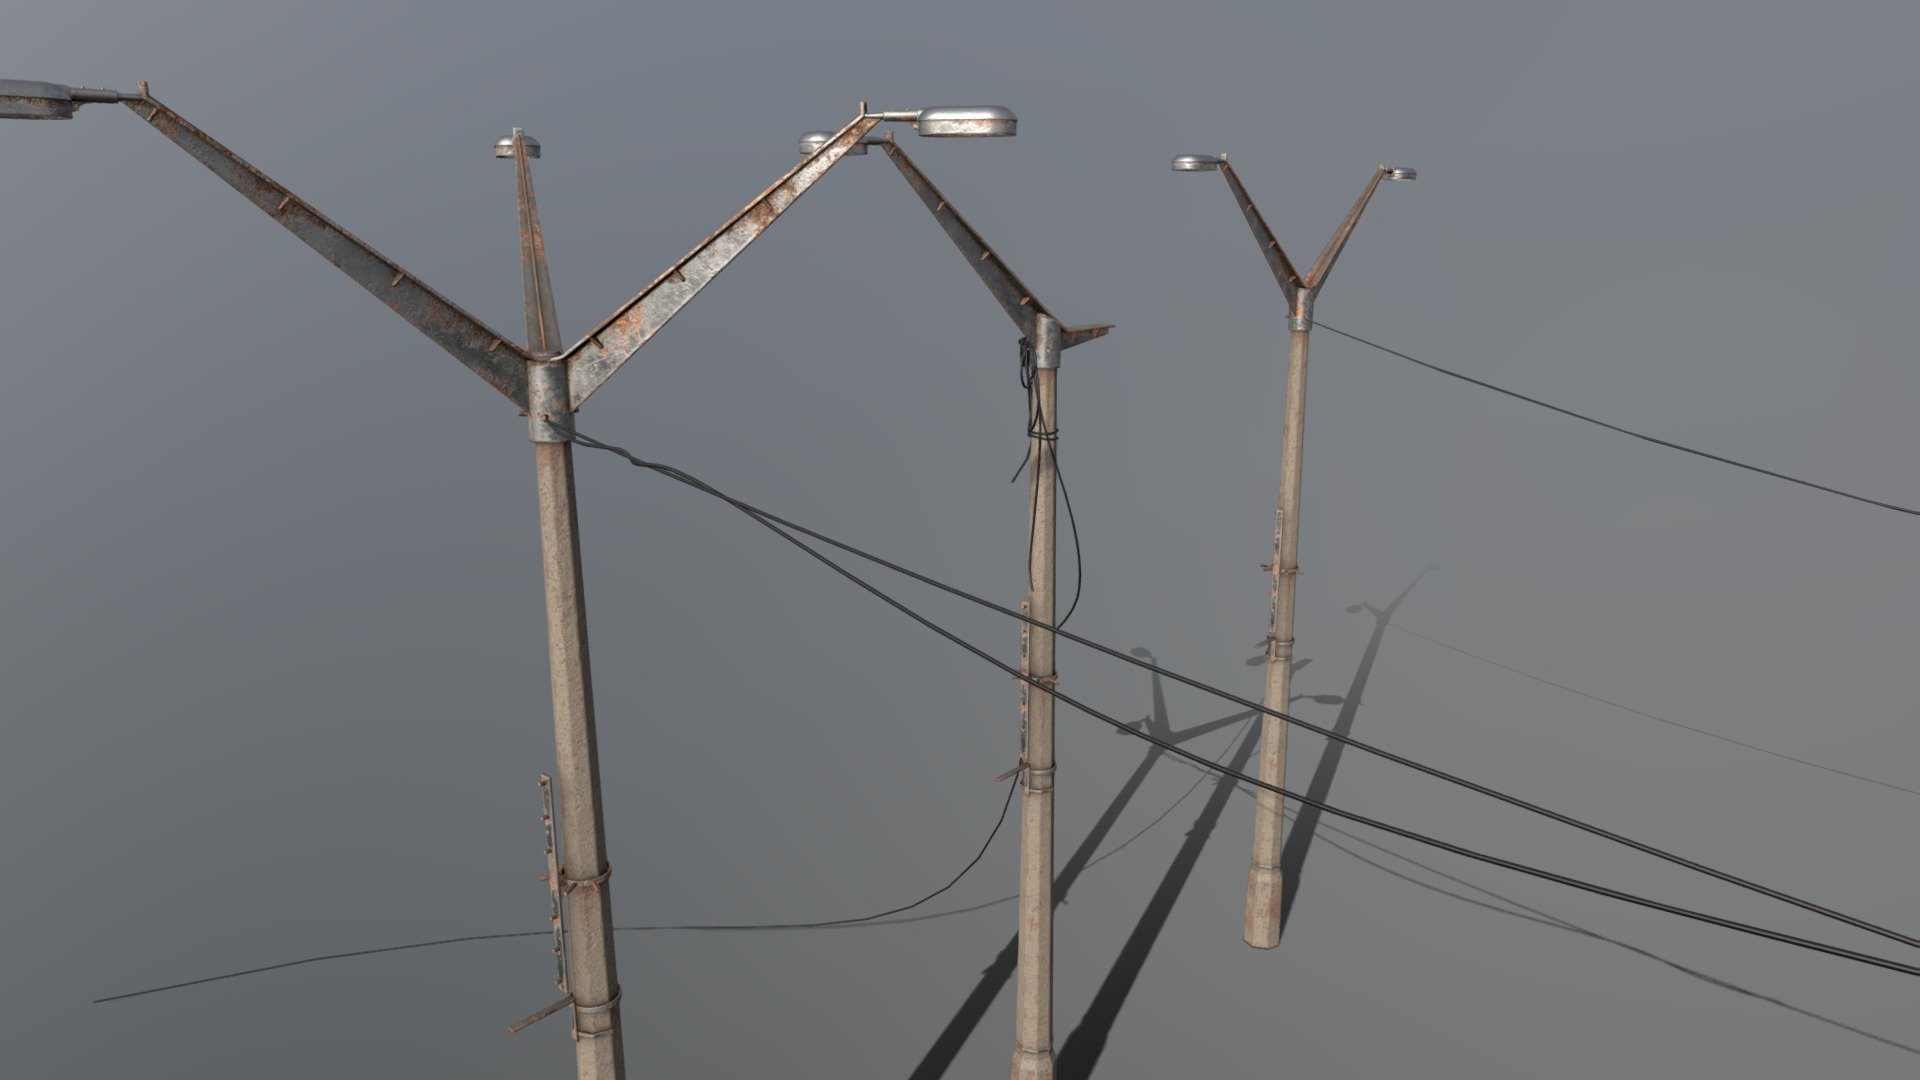 Some Chernobyl/Pripyat style light poles built for a personal Unreal 5 project https://www.artstation.com/artwork/aGkx48

Normal maps are DirectX, so you might need to flip the green channel depending on your software 3d model